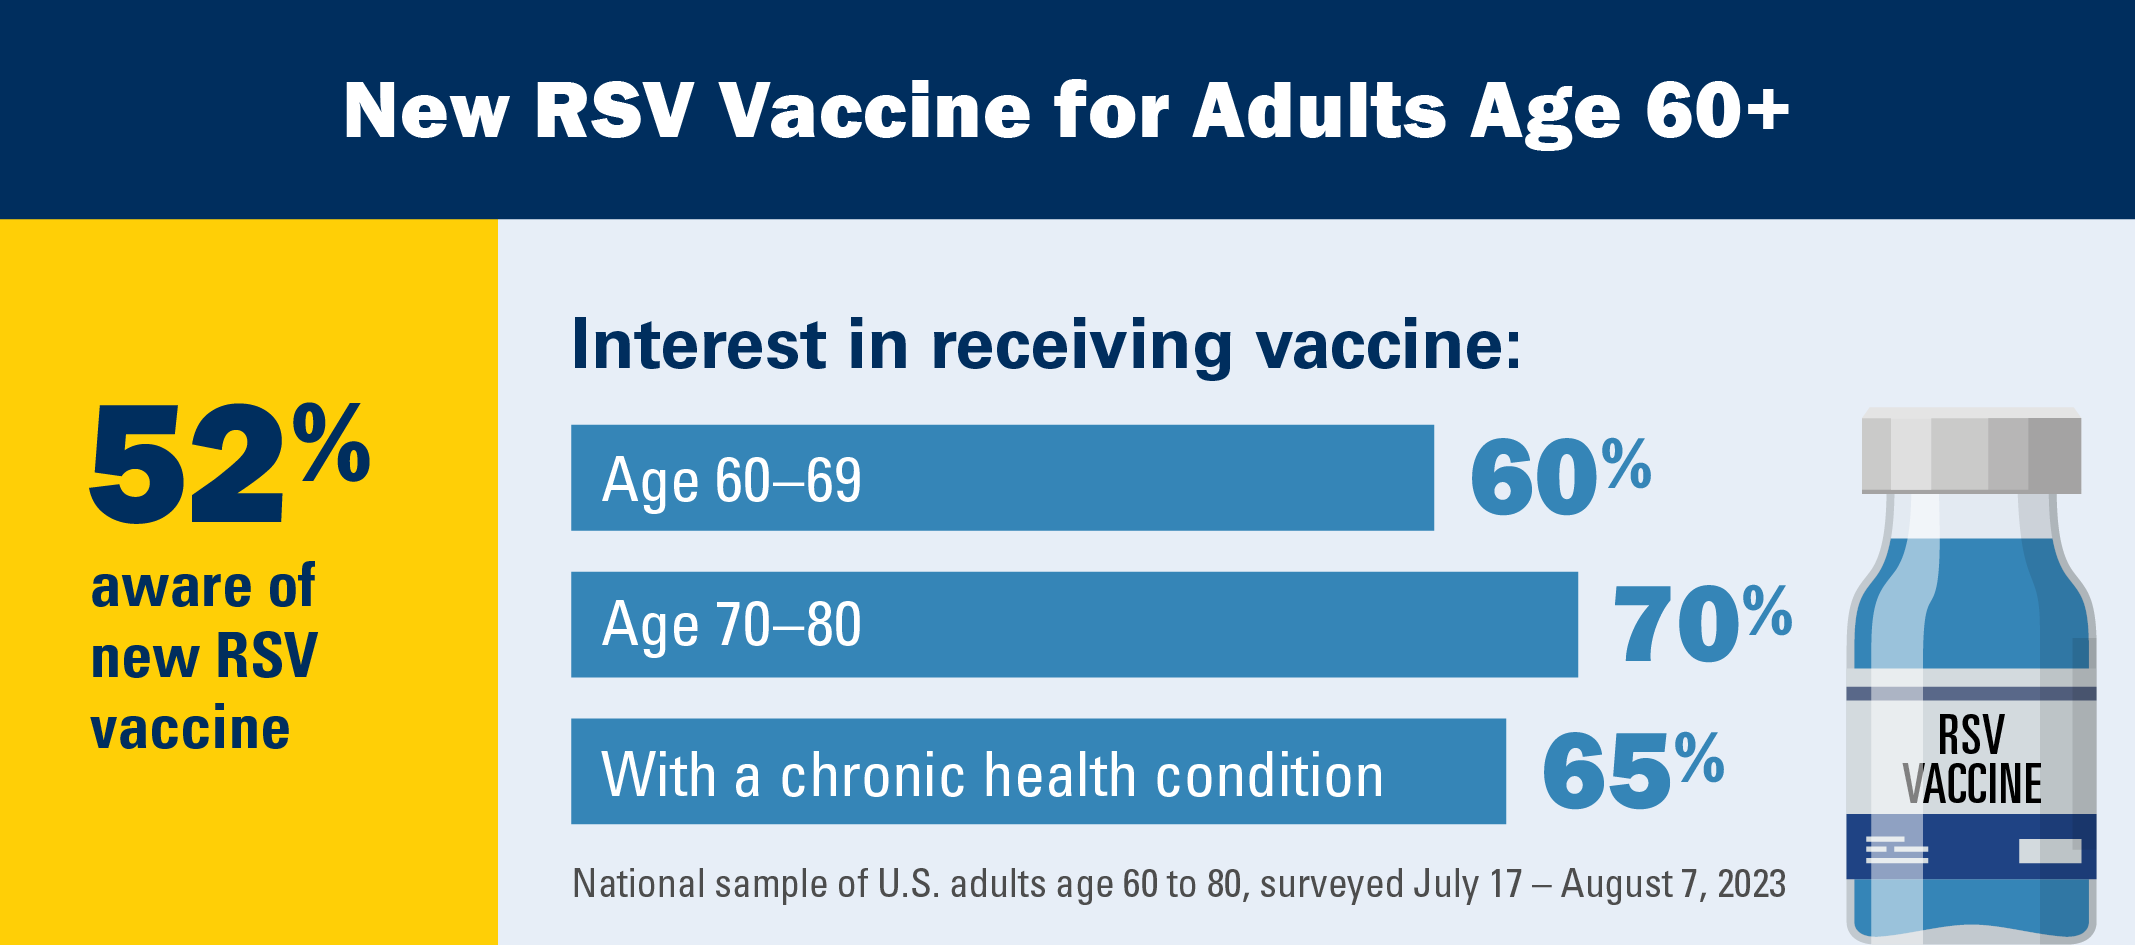 new RSV vaccine for adults age 60+